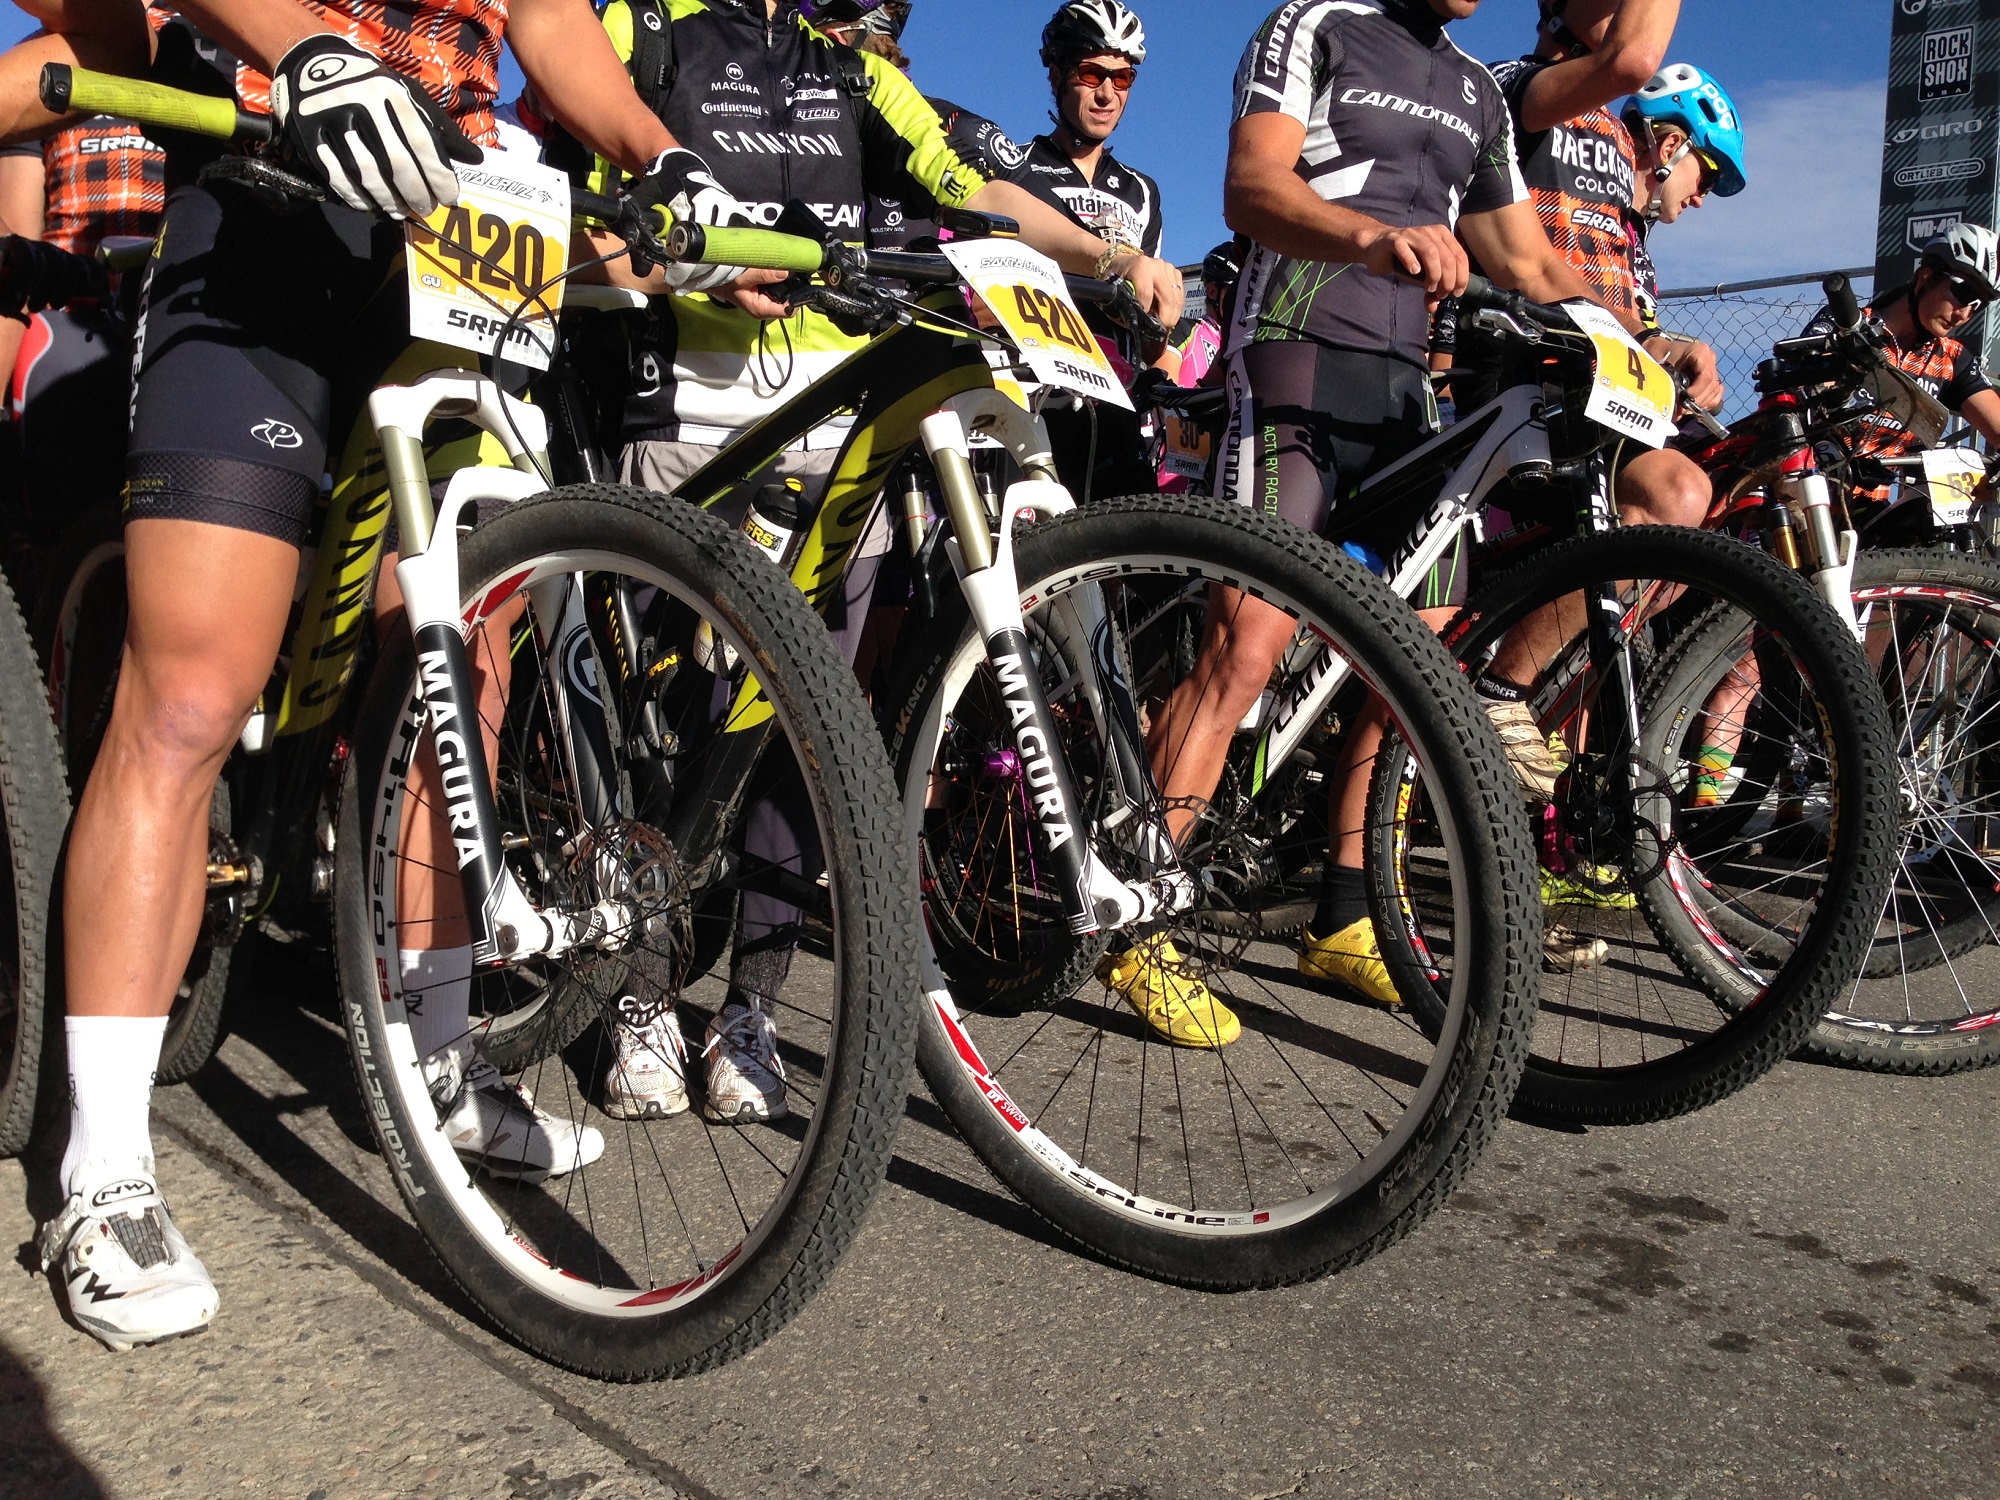 Bikes lines up during the Breck Epic bike race